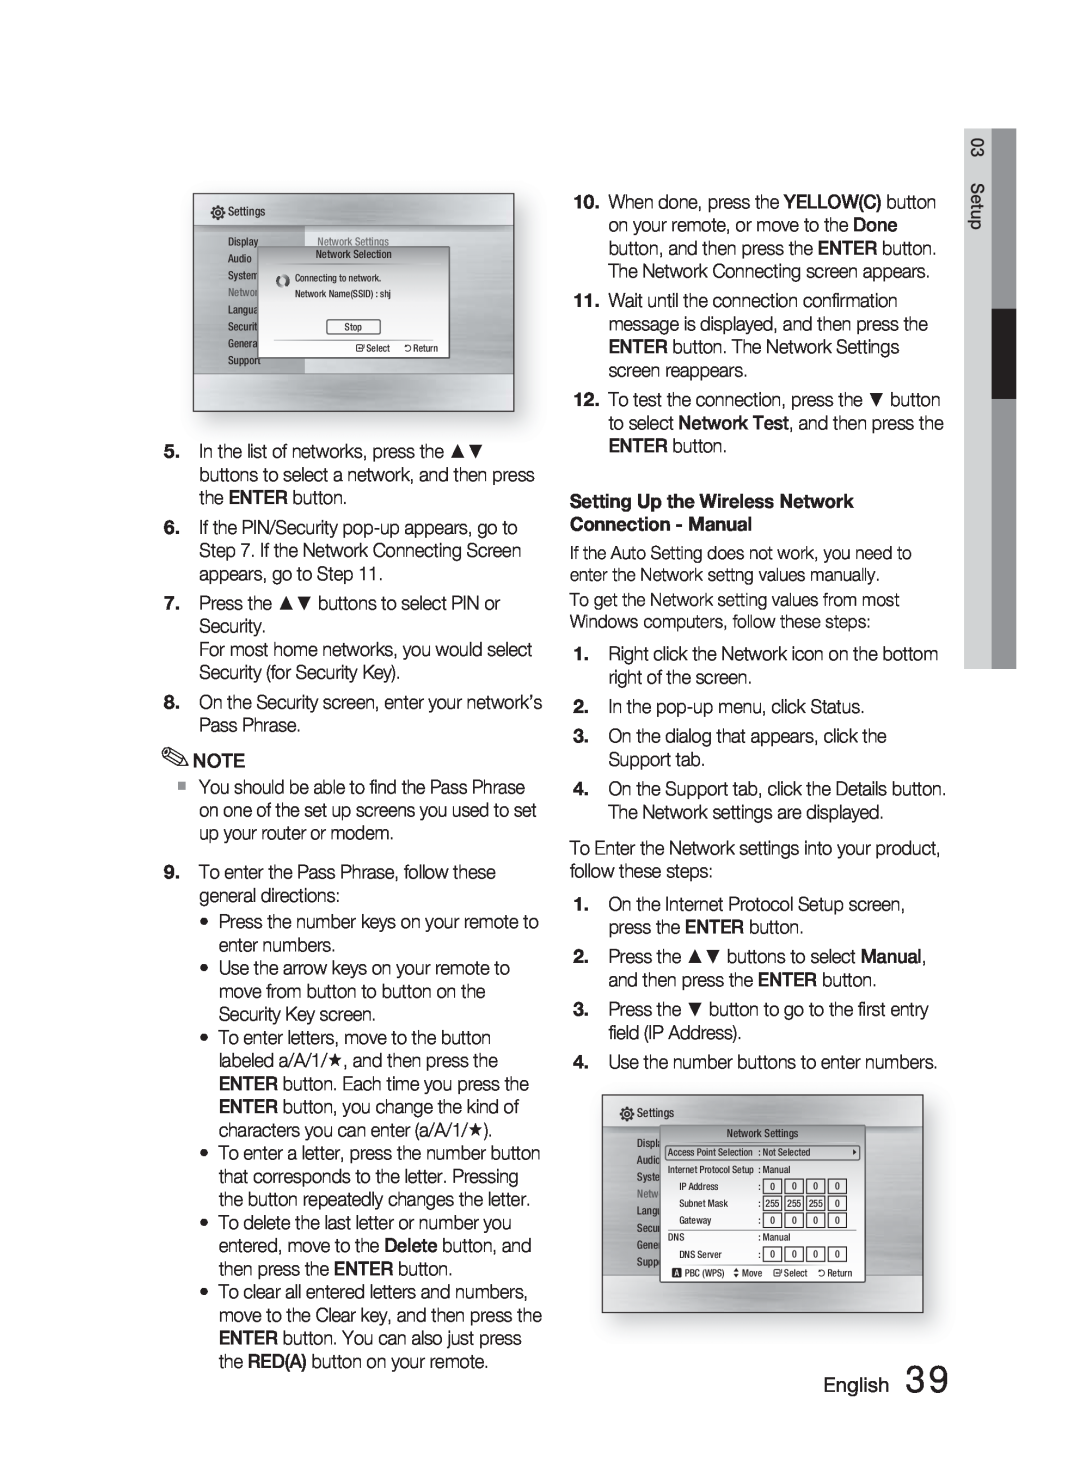 Samsung HT-C5500 user manual English, Setting Up the Wireless Network, Connection - Manual 